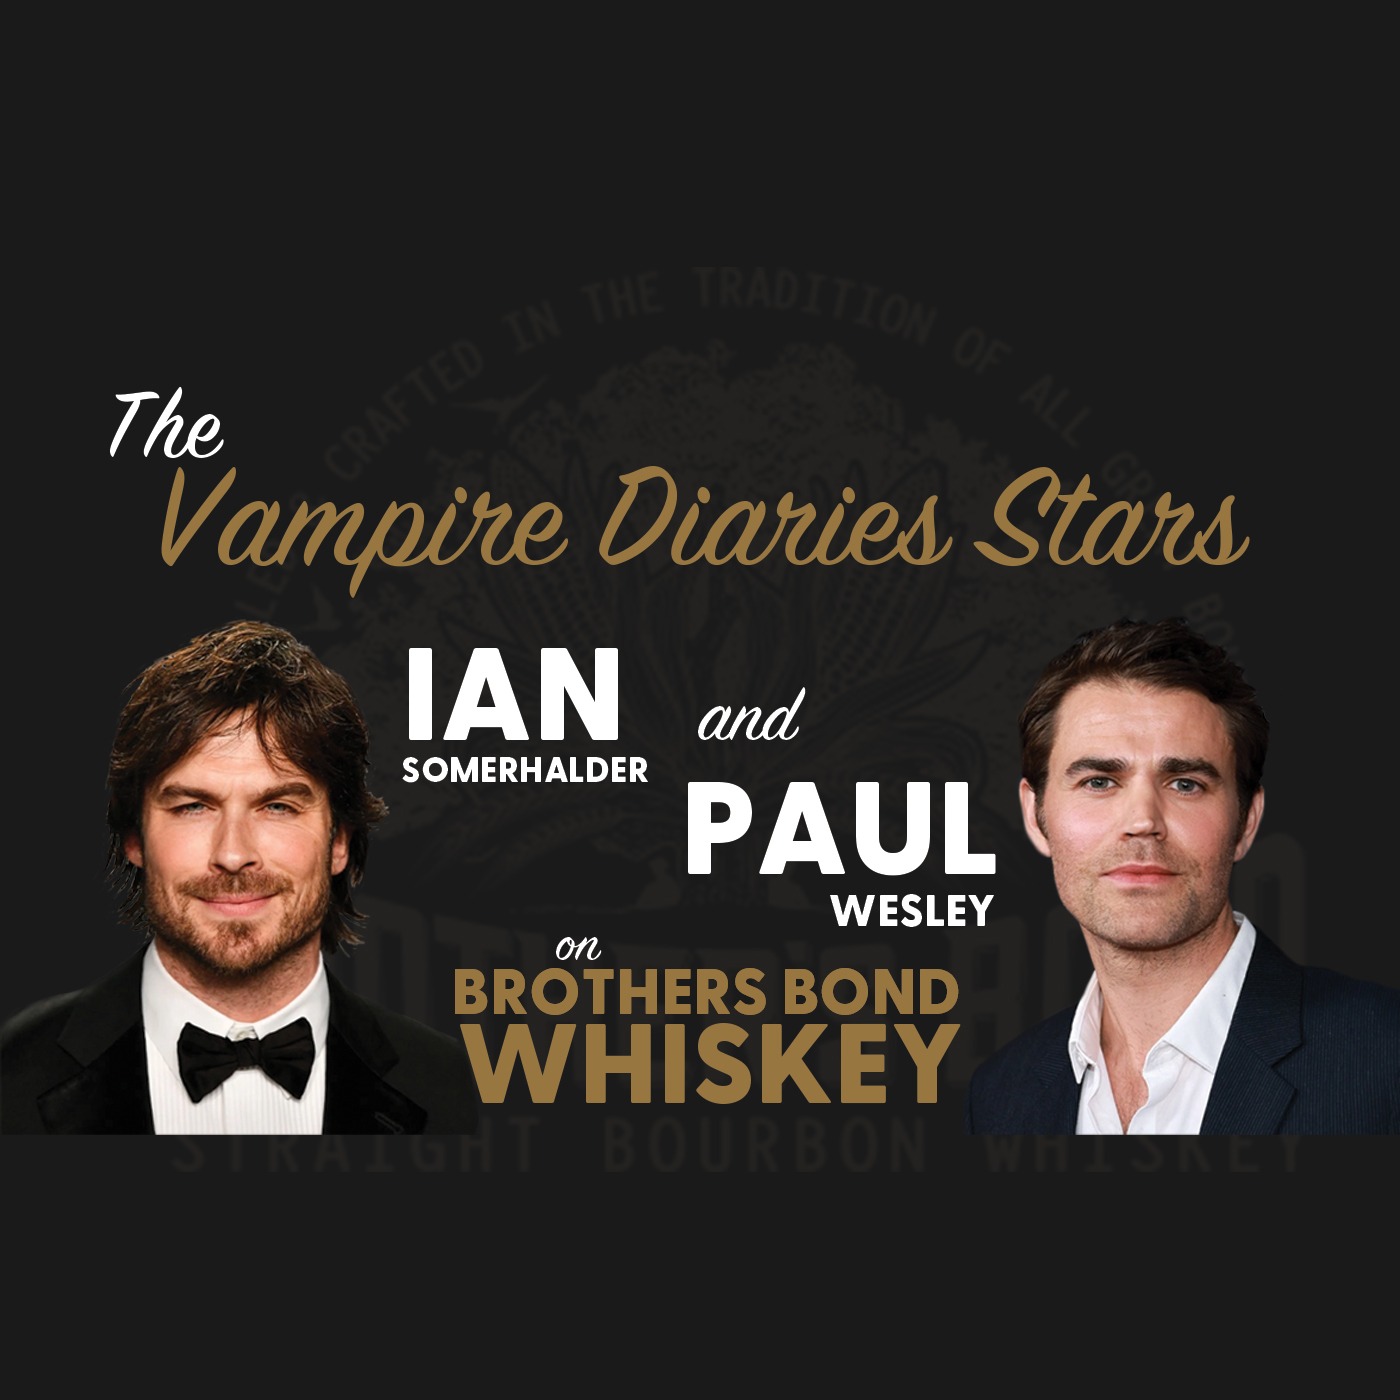 The Vampire Diaries Stars Ian Somerhalder and Paul Wesley on Brother's Bond Whiskey